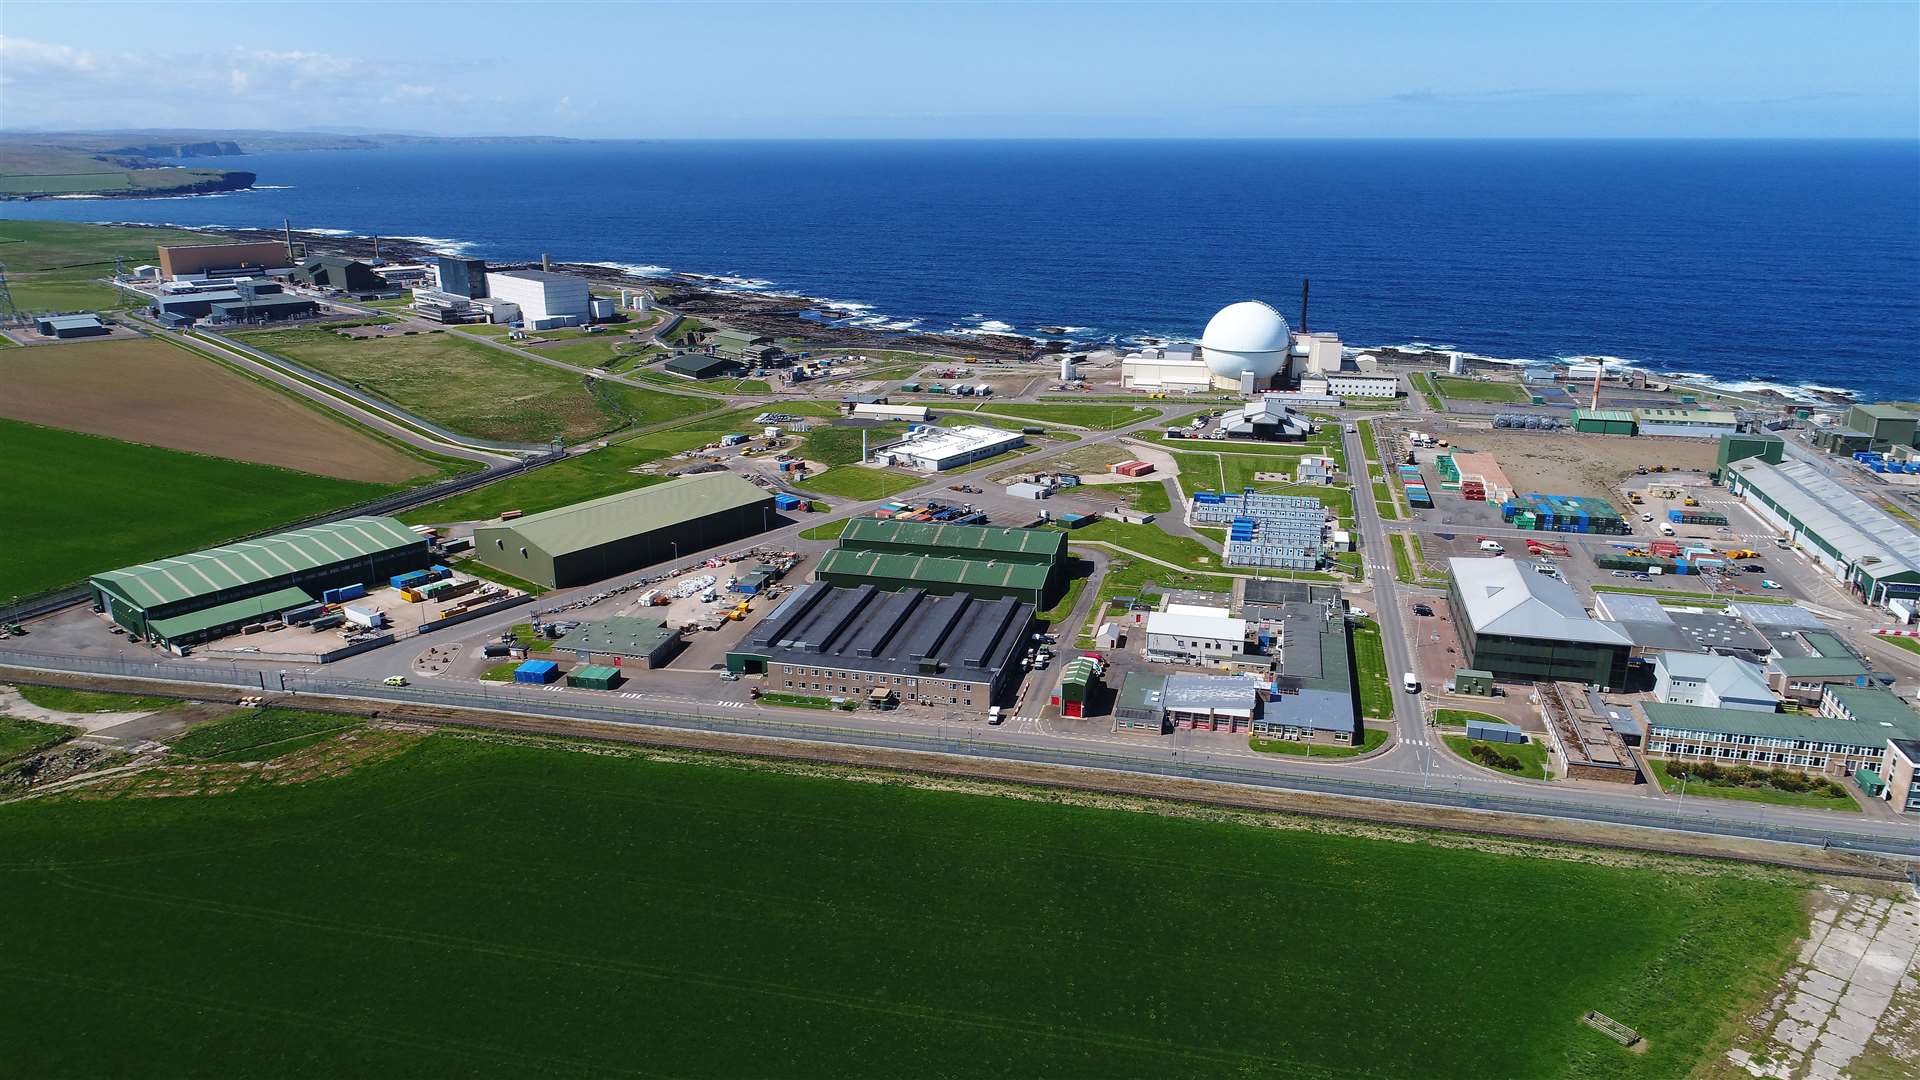 A view of the Dounreay site taken in May 2018. Picture: DSRL / NDA